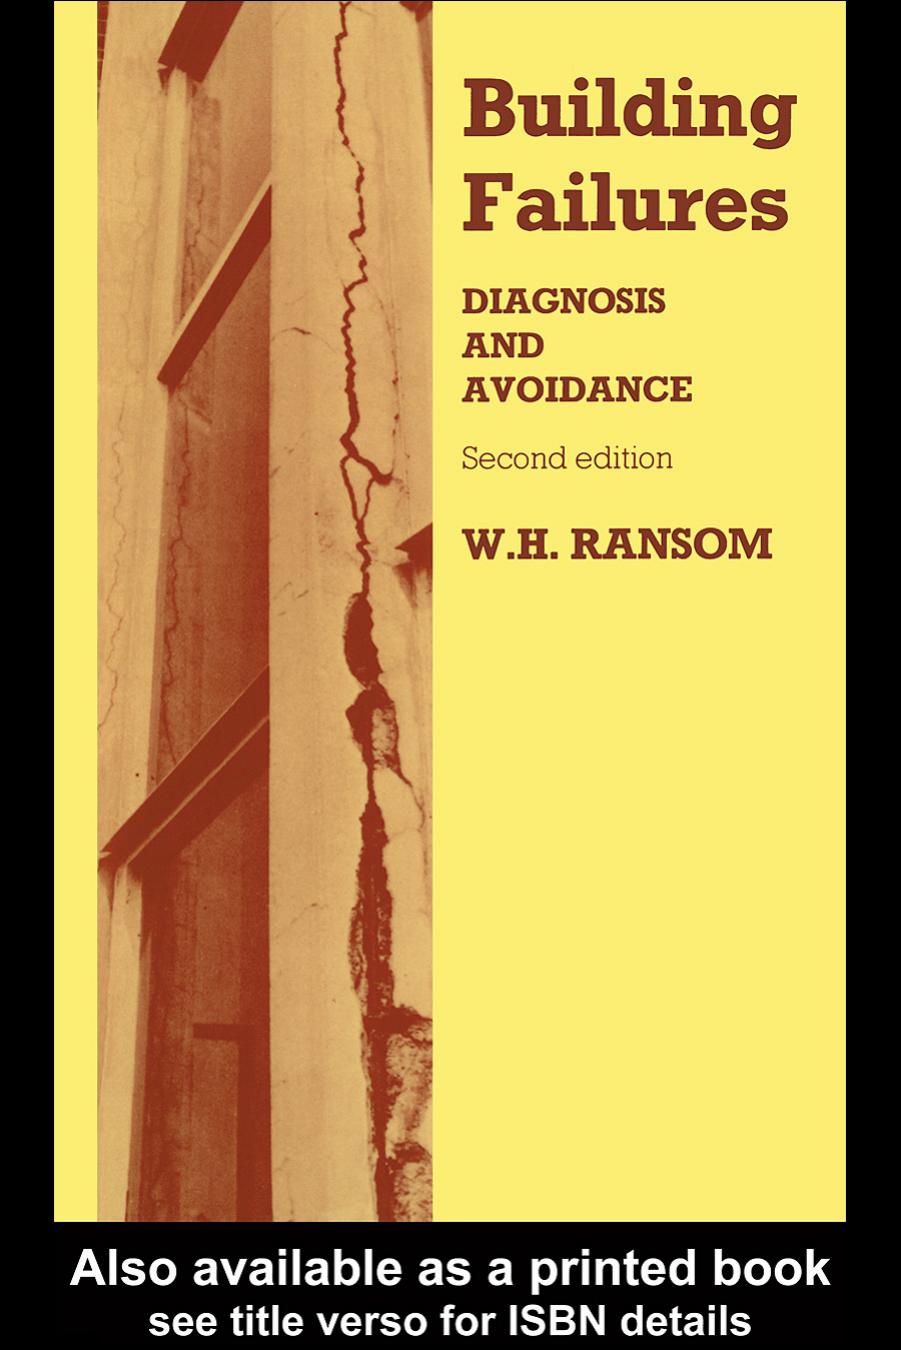 Building Failures: Diagnosis and Avoidance, Second edition